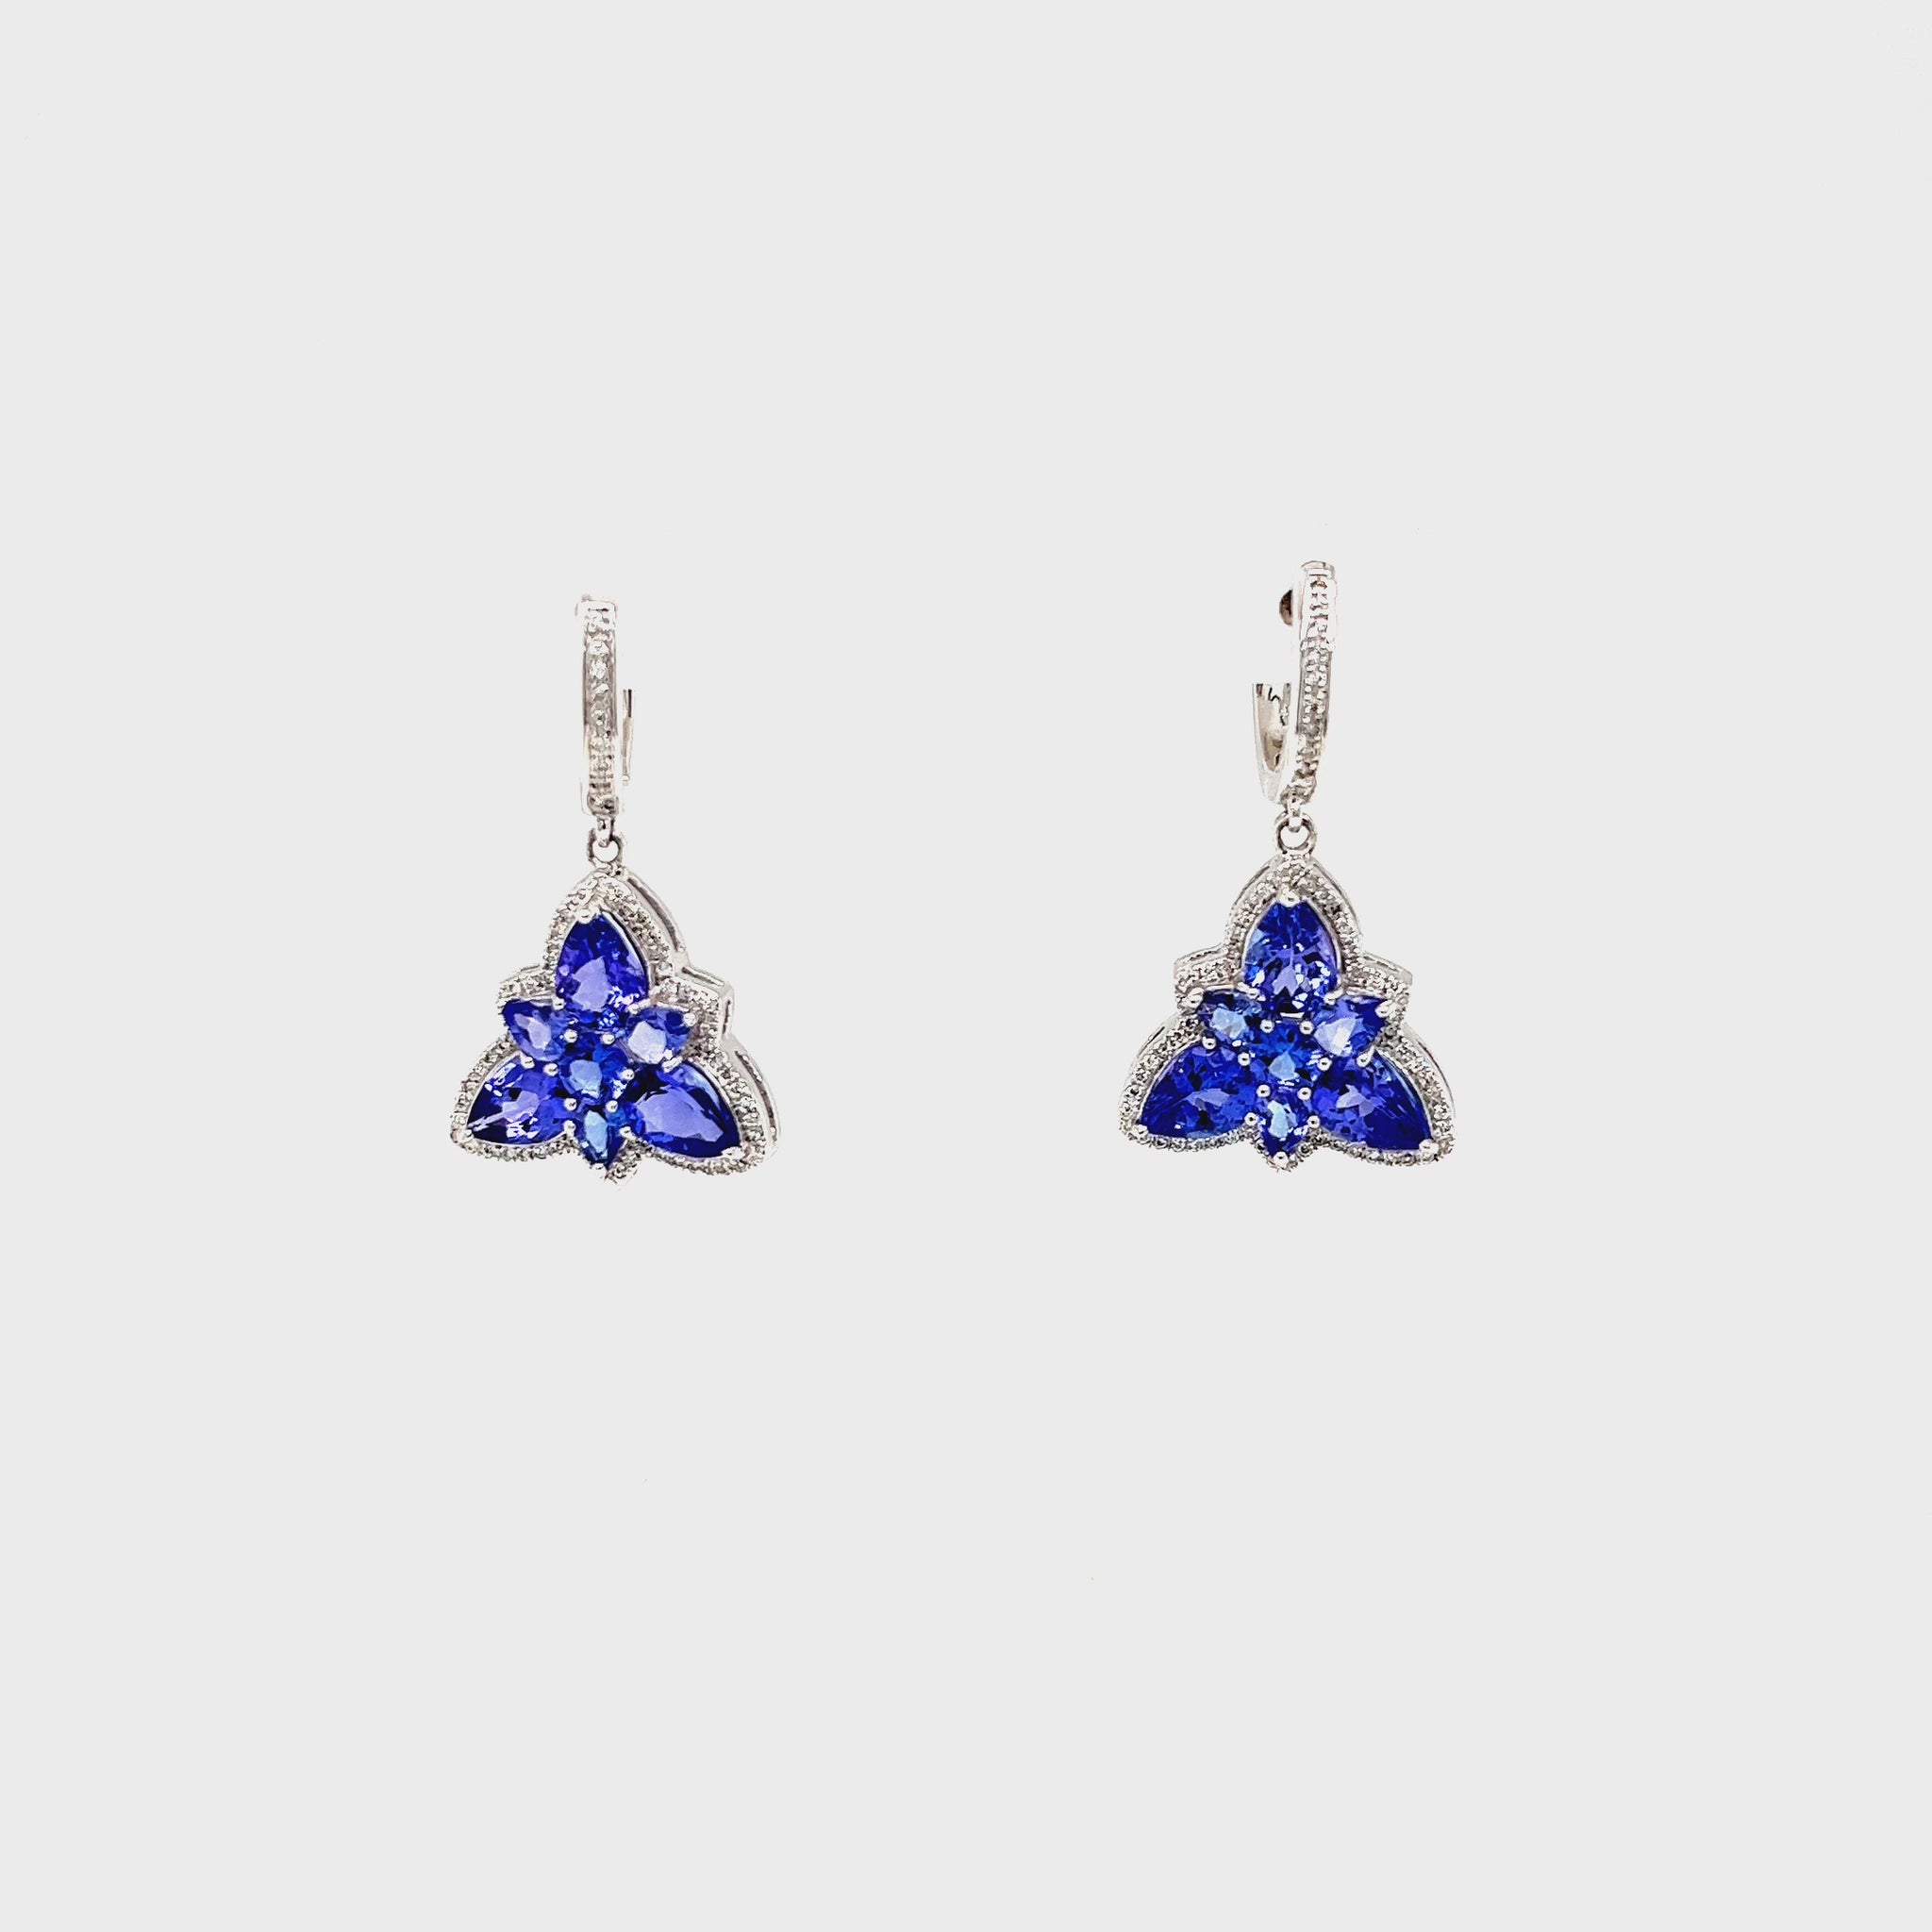 Floral Tanzanite Drop Earrings: Exquisite Tanzanite Gemstone, Elegant Floral Design, Dazzling Drop Style, Sterling Silver Setting, Sparkling Statement Jewelry, Unique Floral Elegance, Beautiful Gemstone Earrings, Feminine and Timeless, Handcrafted Floral Delight, Stunning Tanzanite Accents.